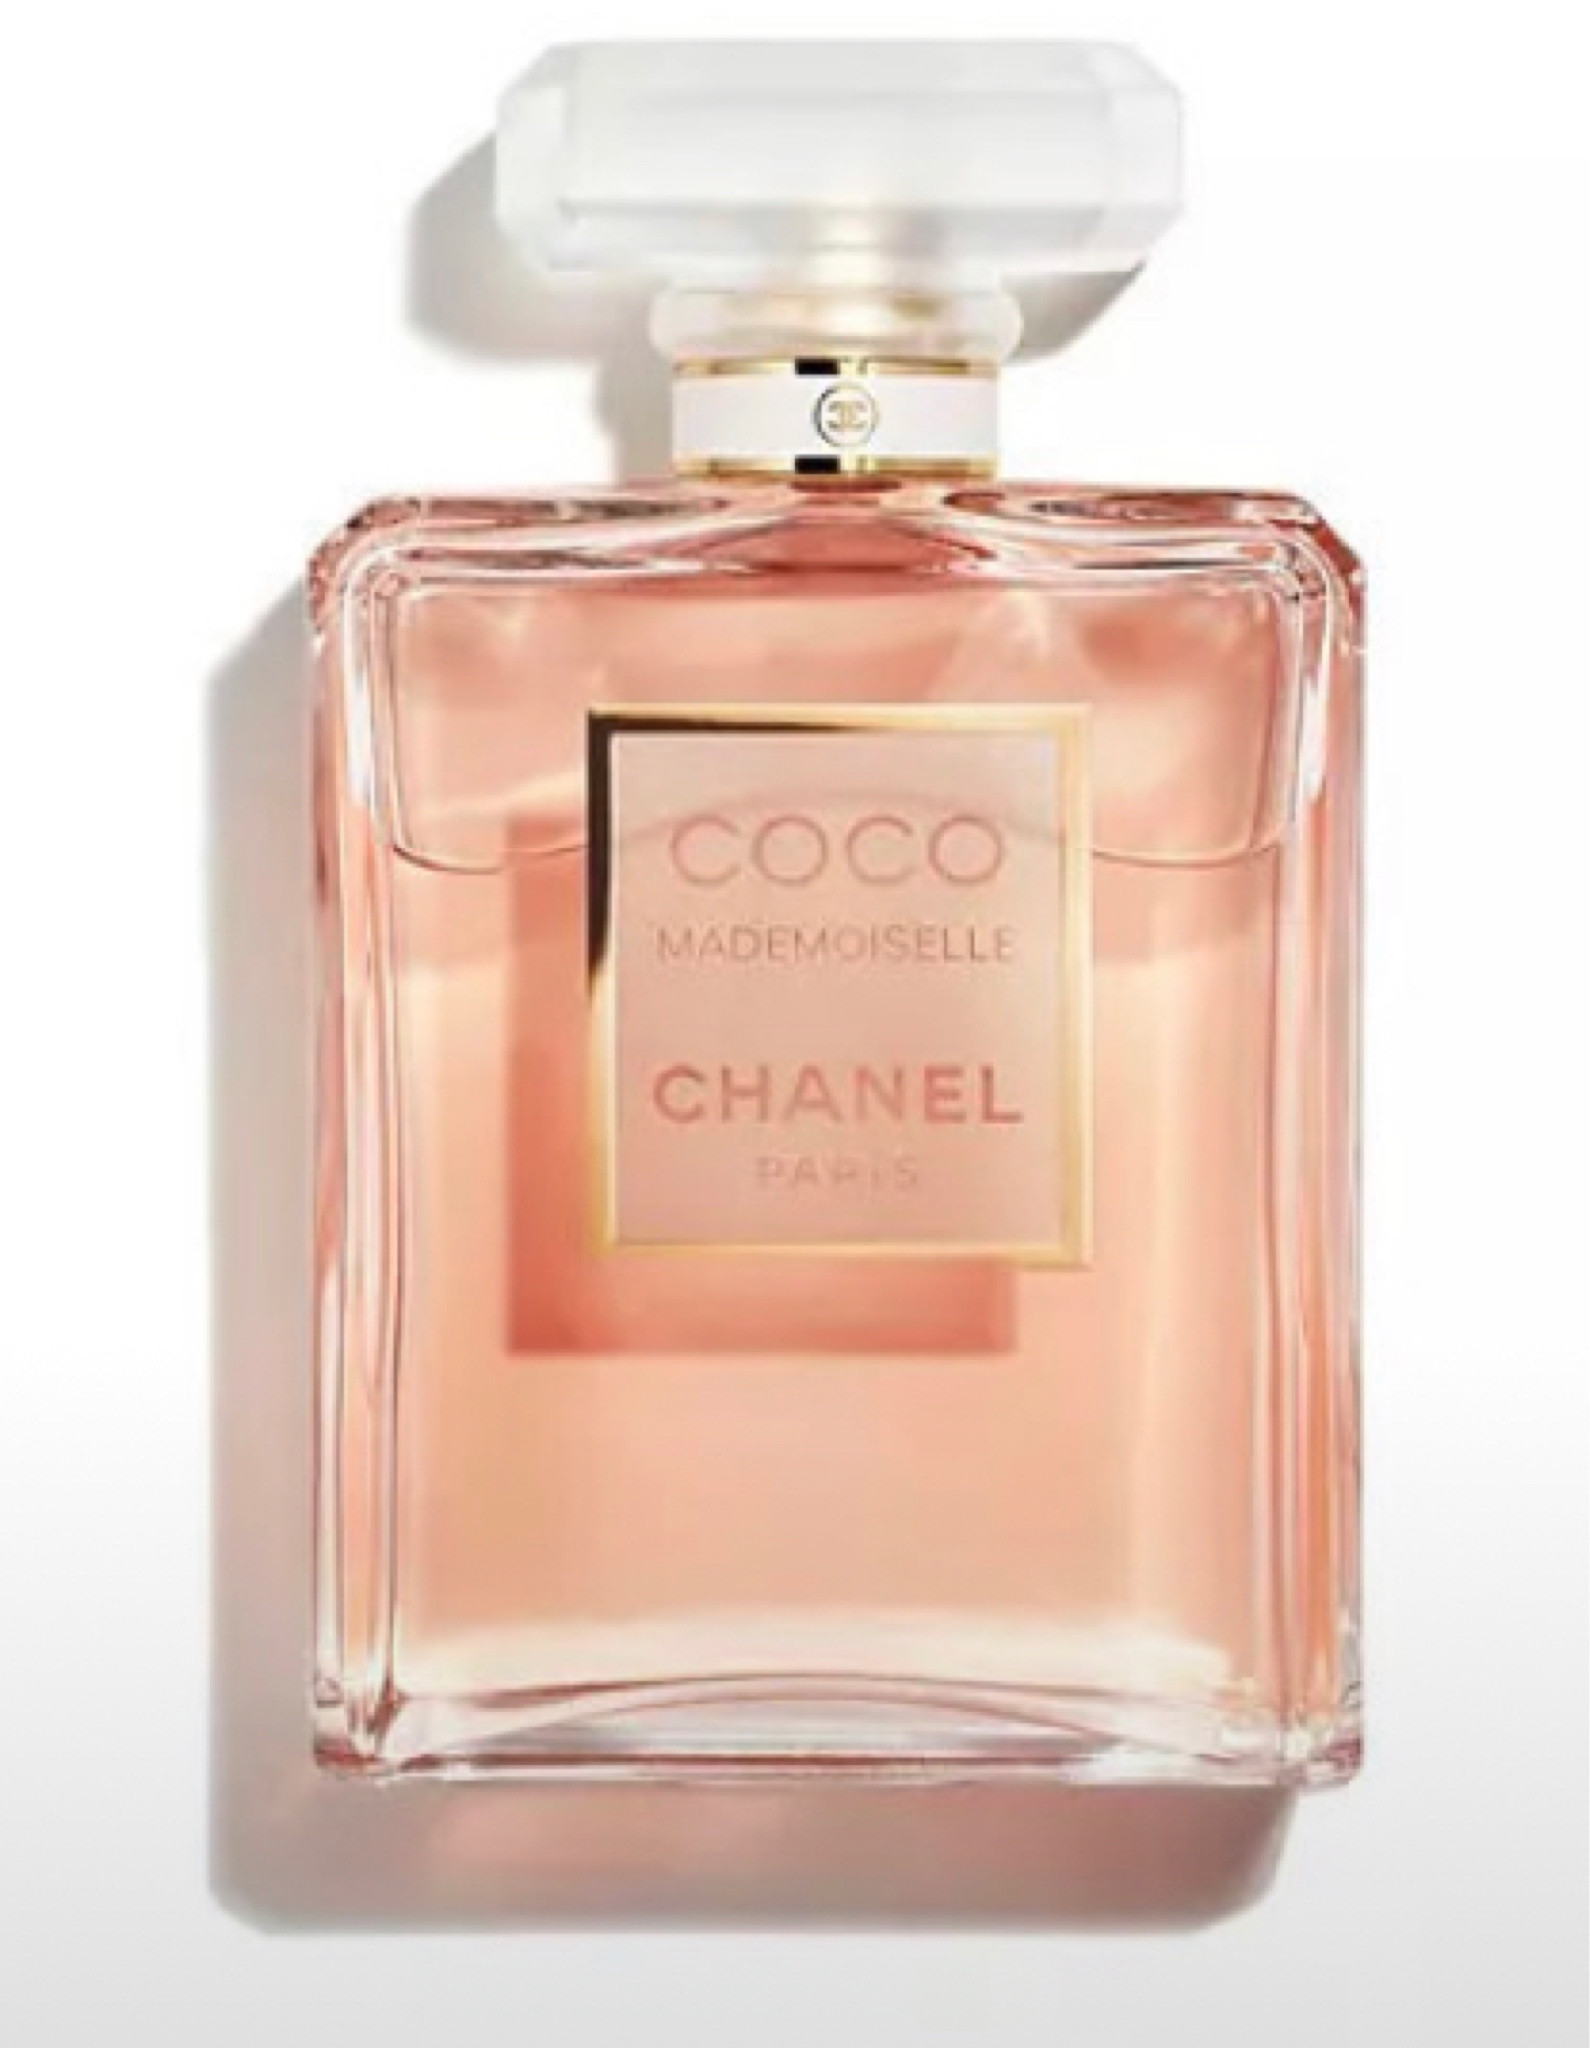 A Guide To The Best Chanel Coco Mademoiselle Dupes